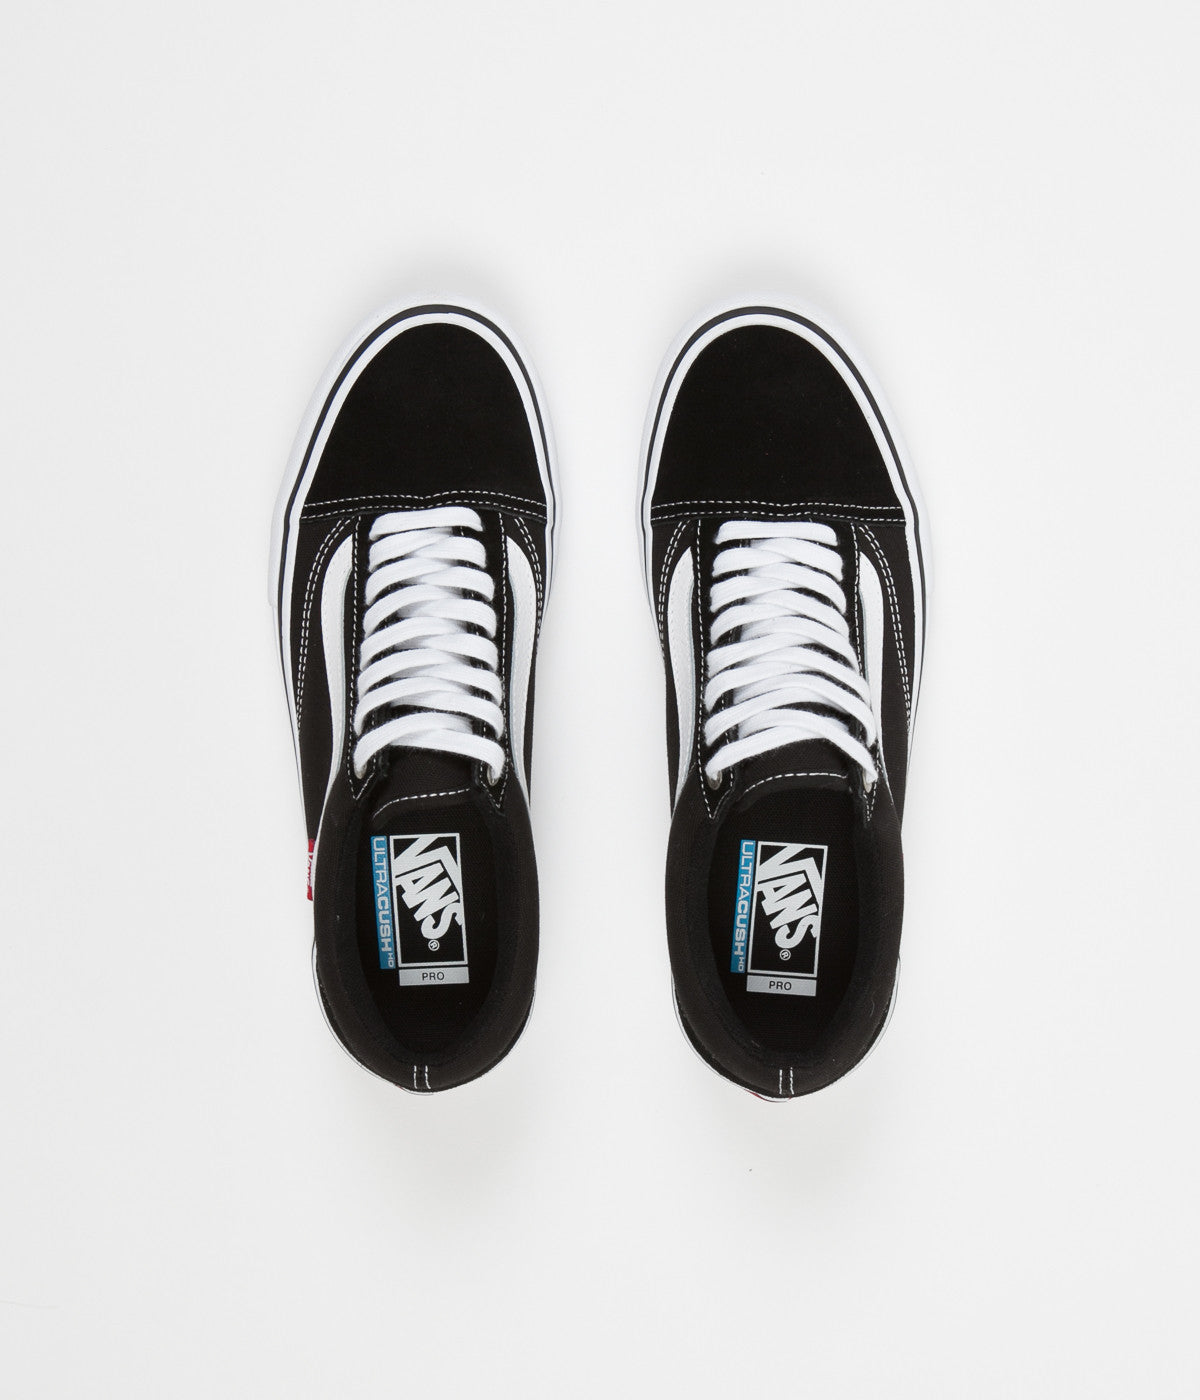 vans old skool without white stitching 